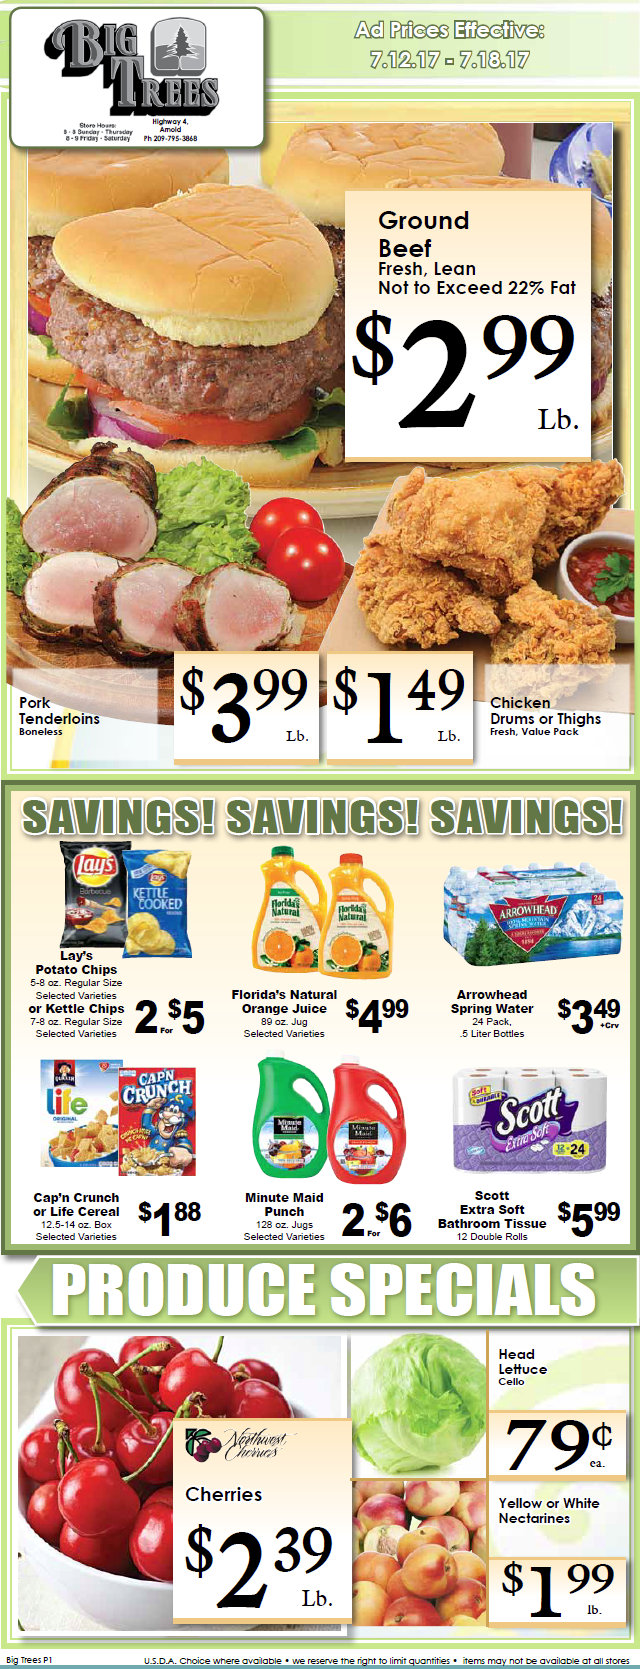 Big Trees Market Weekly Ad & Specials Through July 18th